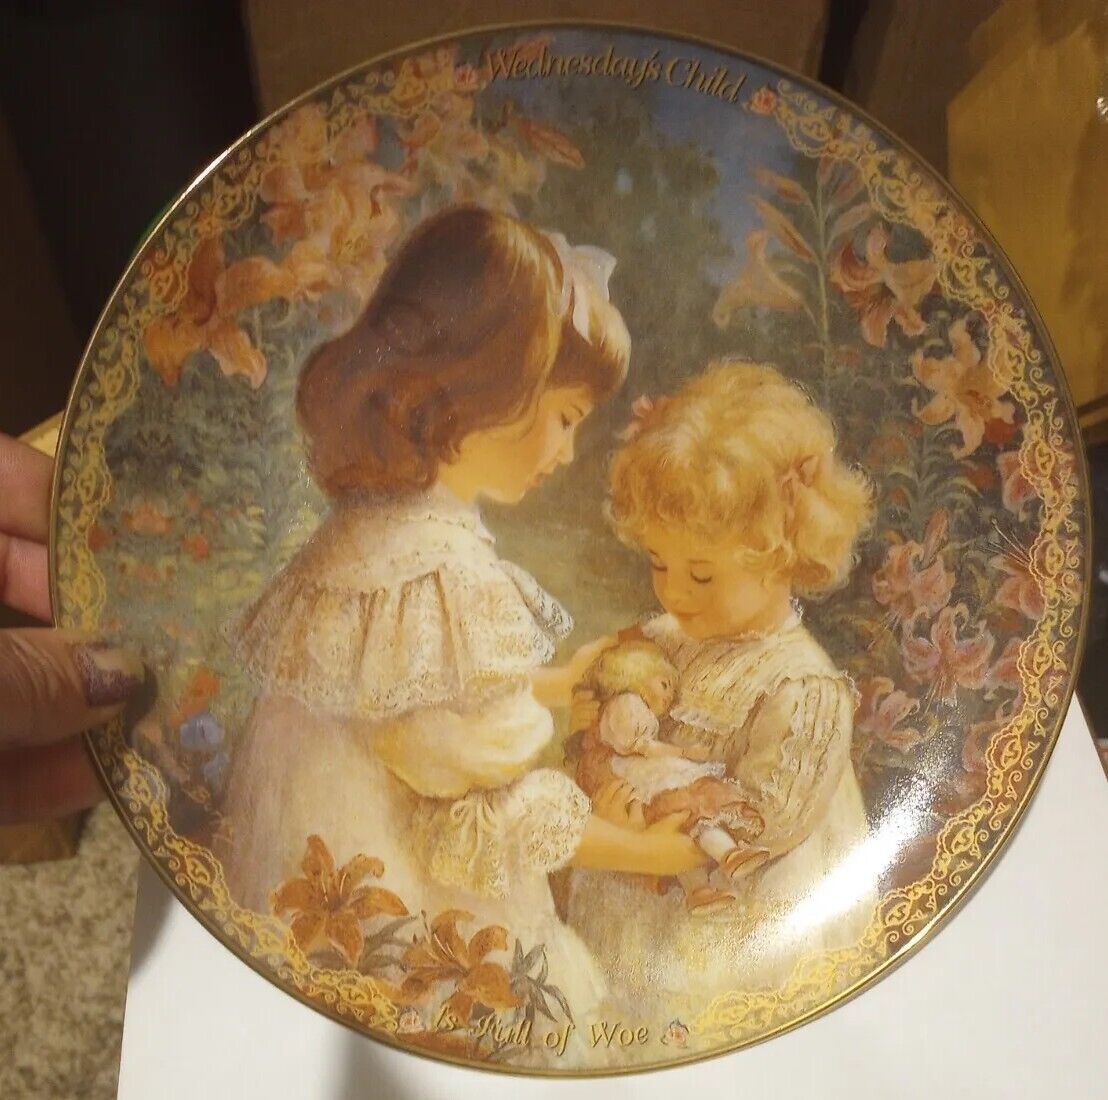 Precious gifts day by day Wednesday child by Brenda Burke children lovely plate 